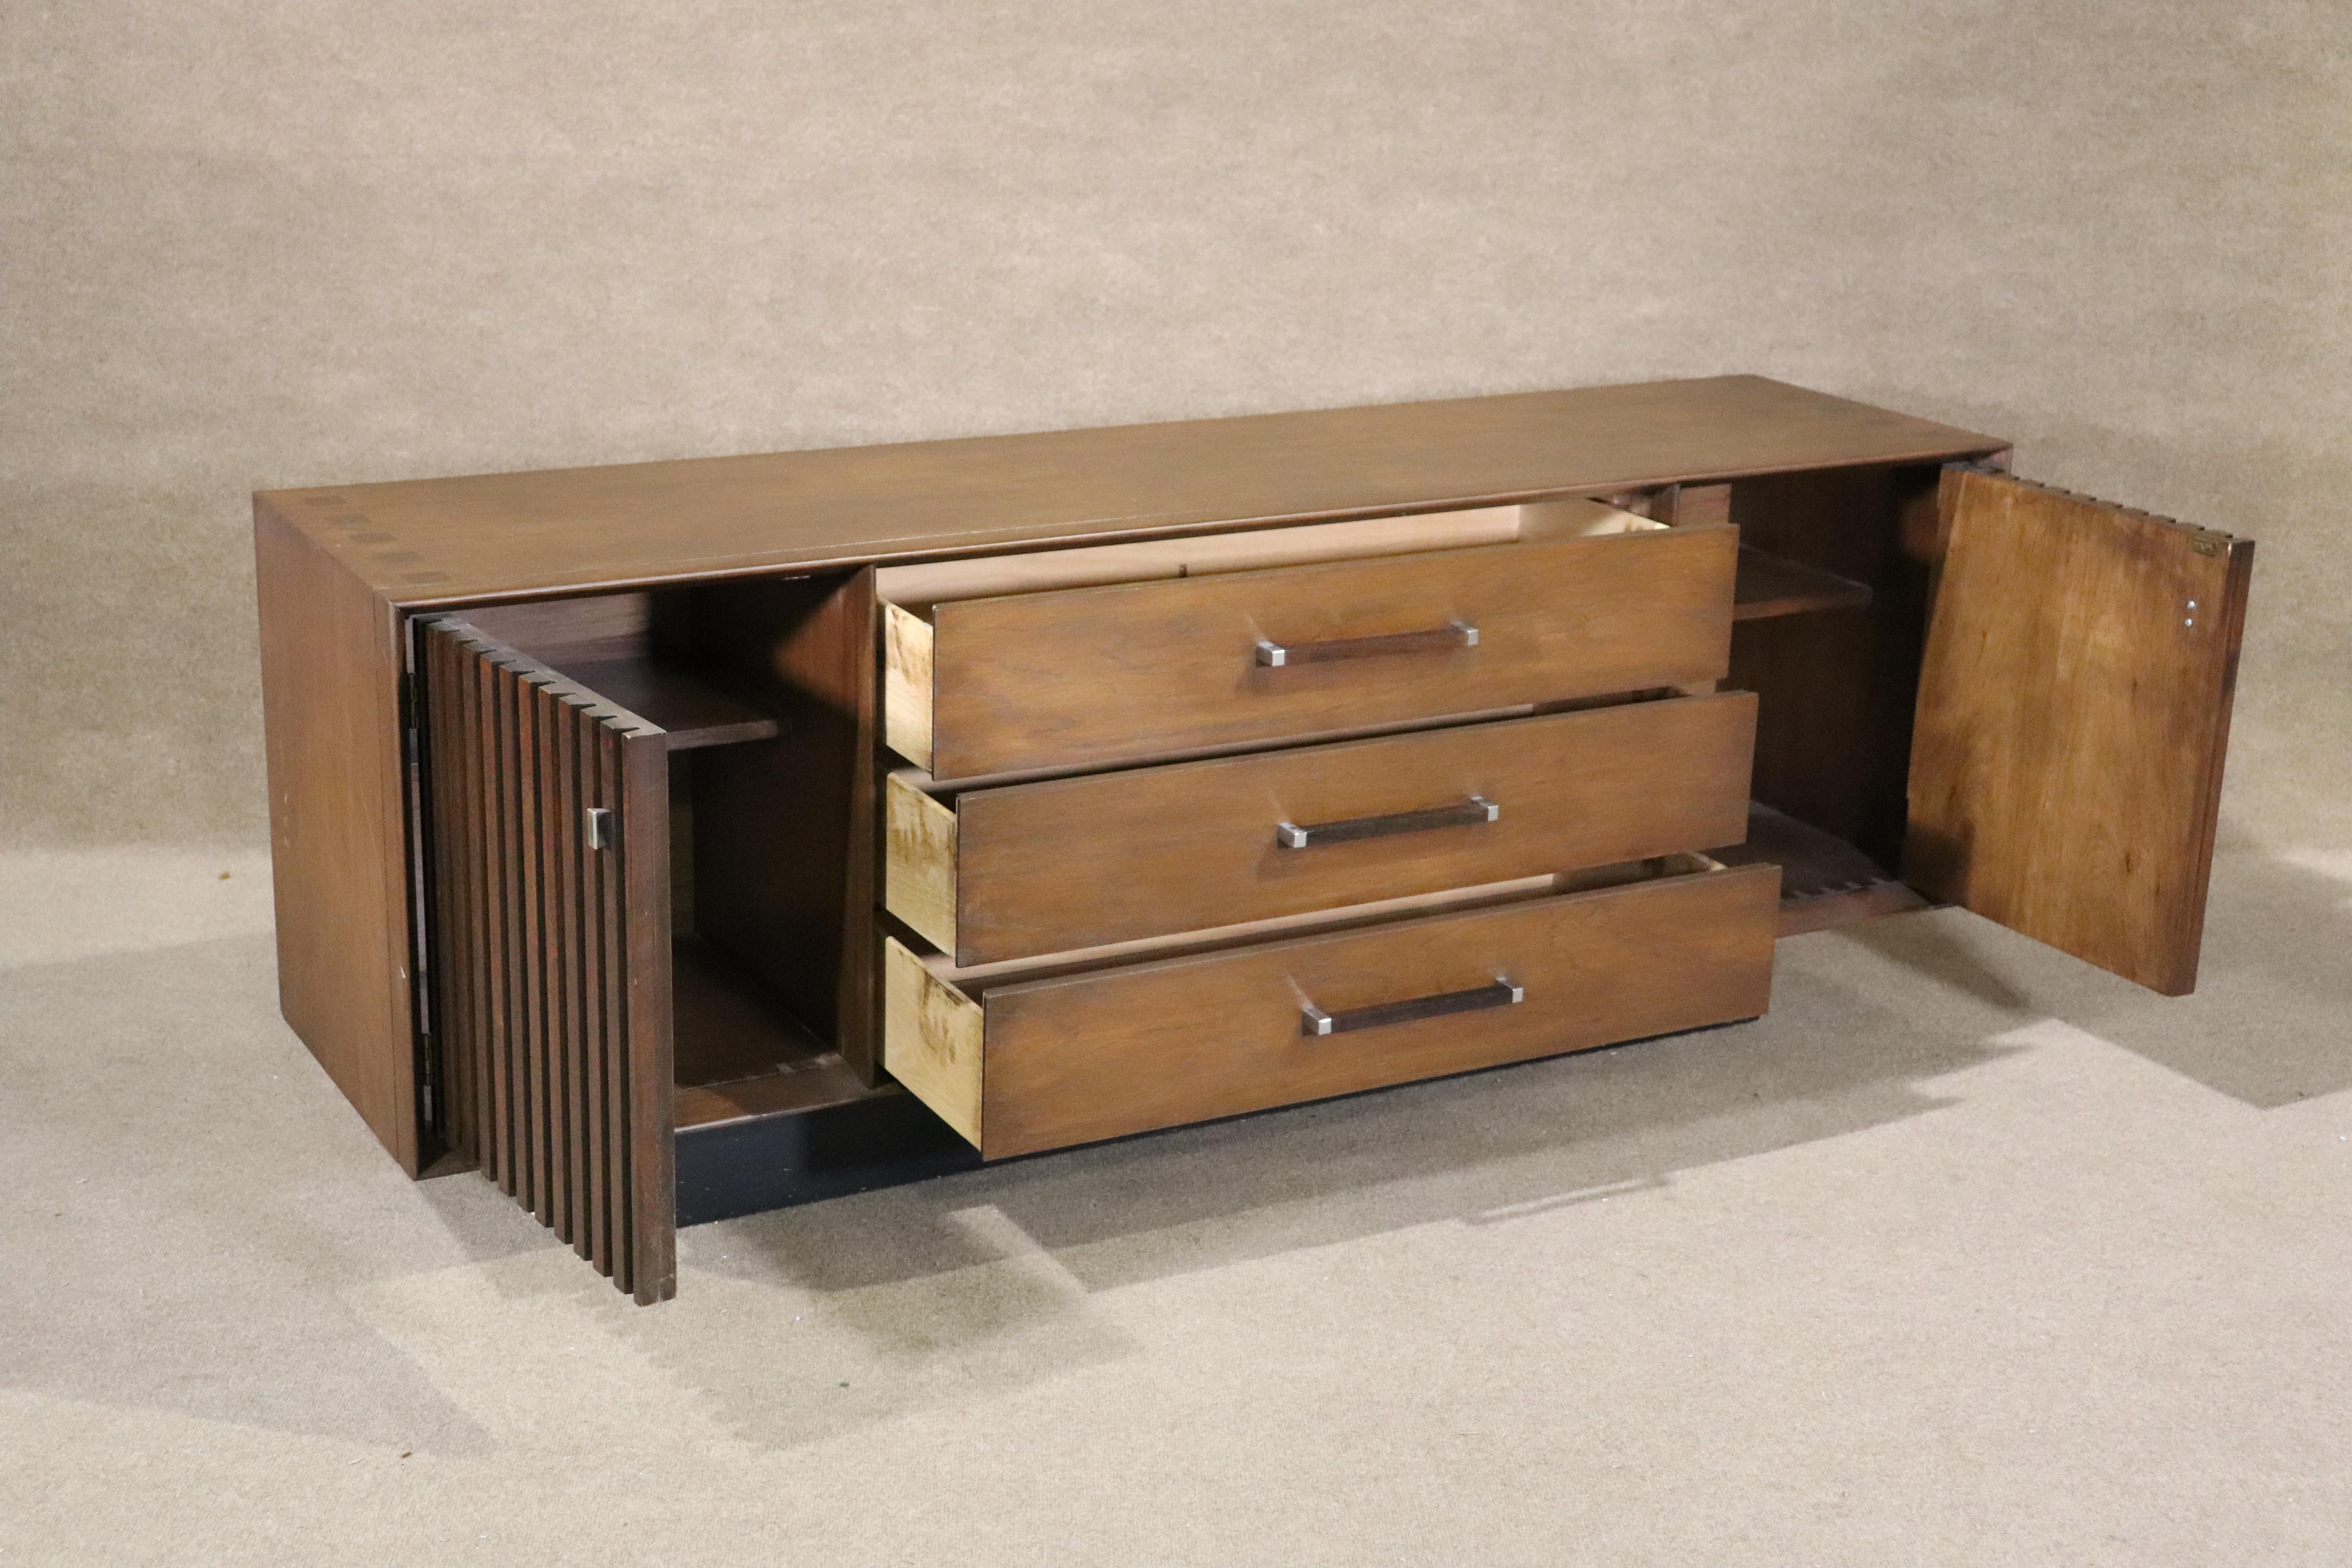 This long mid-century modern unit has dresser drawers and cabinets storage. Walnut grain wood with accenting rosewood slats and top inlay.
Please confirm location NY or NJ